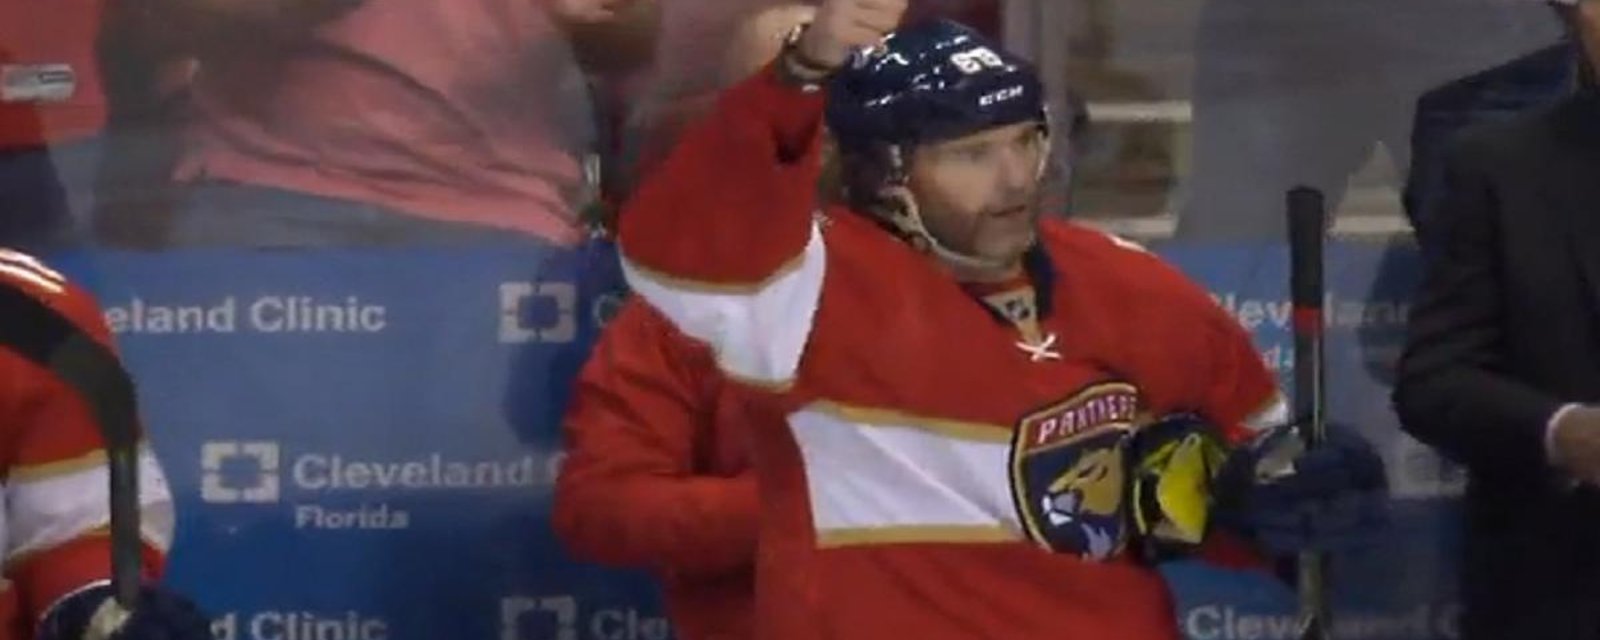 Jagr gets his 1,888th point and gives best description ever!